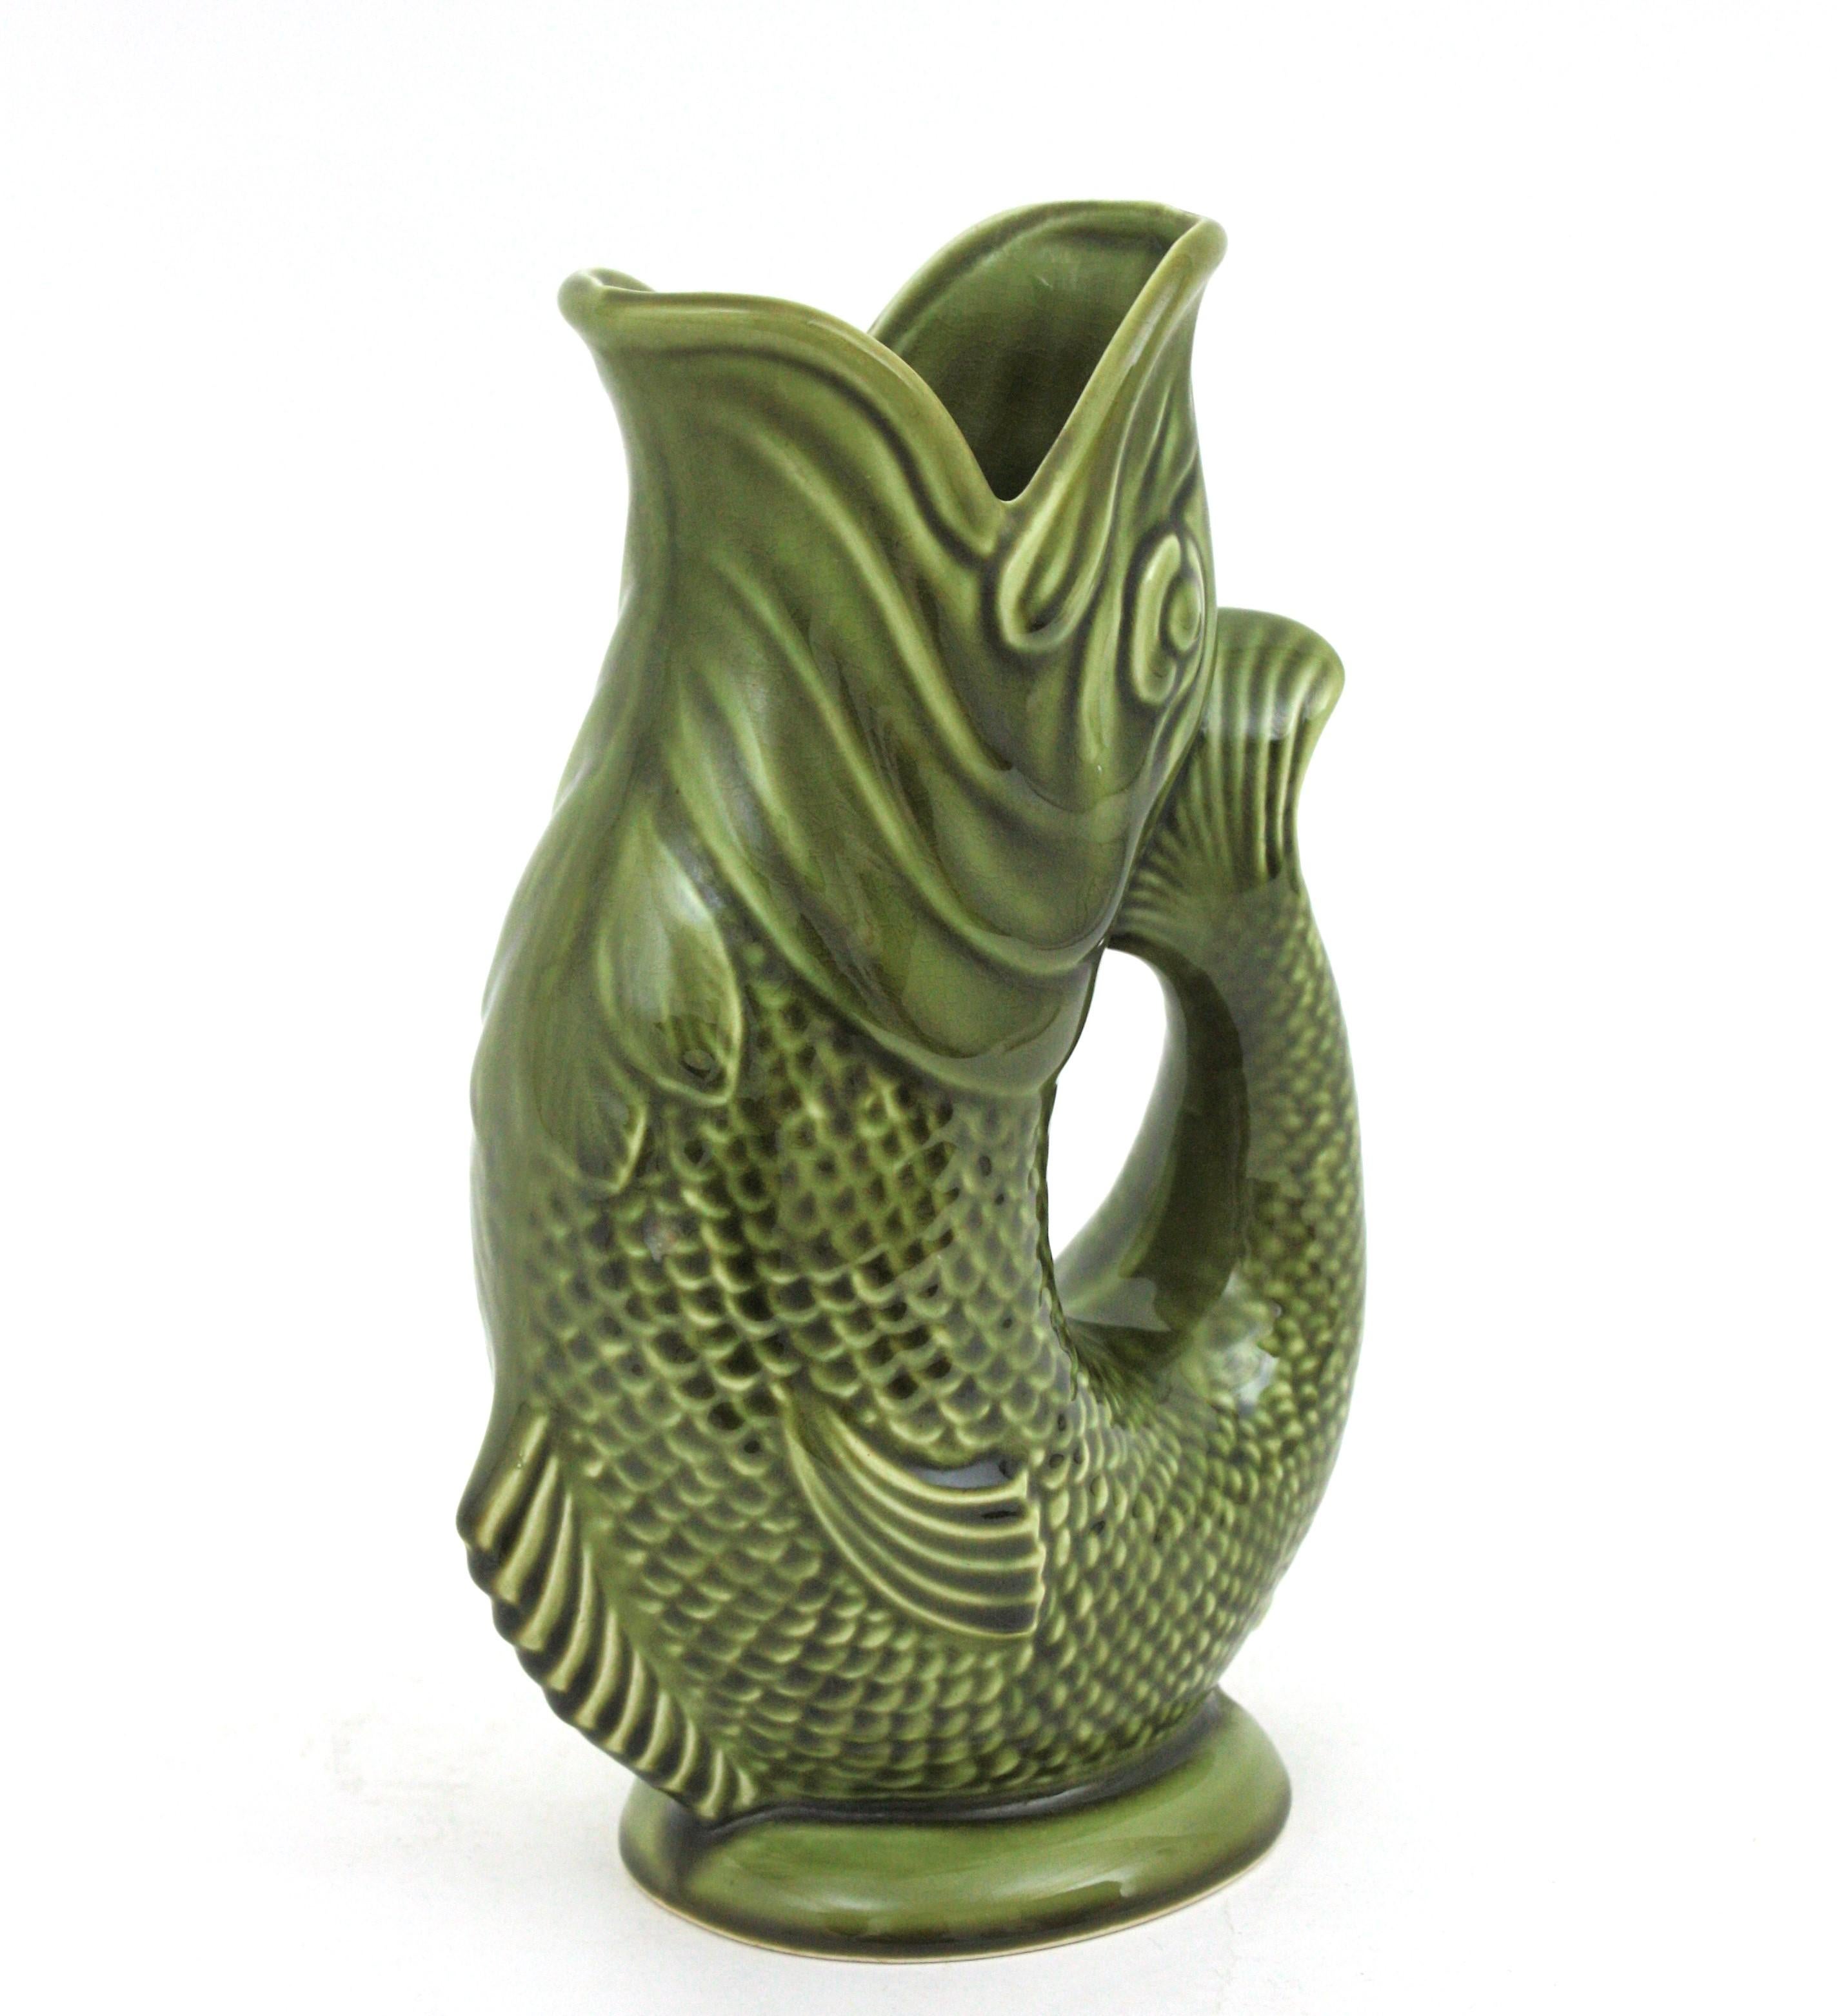 Oversized Glazed Ceramic Gurgle Fish Jug Tall Pitcher, 1950s In Good Condition For Sale In Barcelona, ES